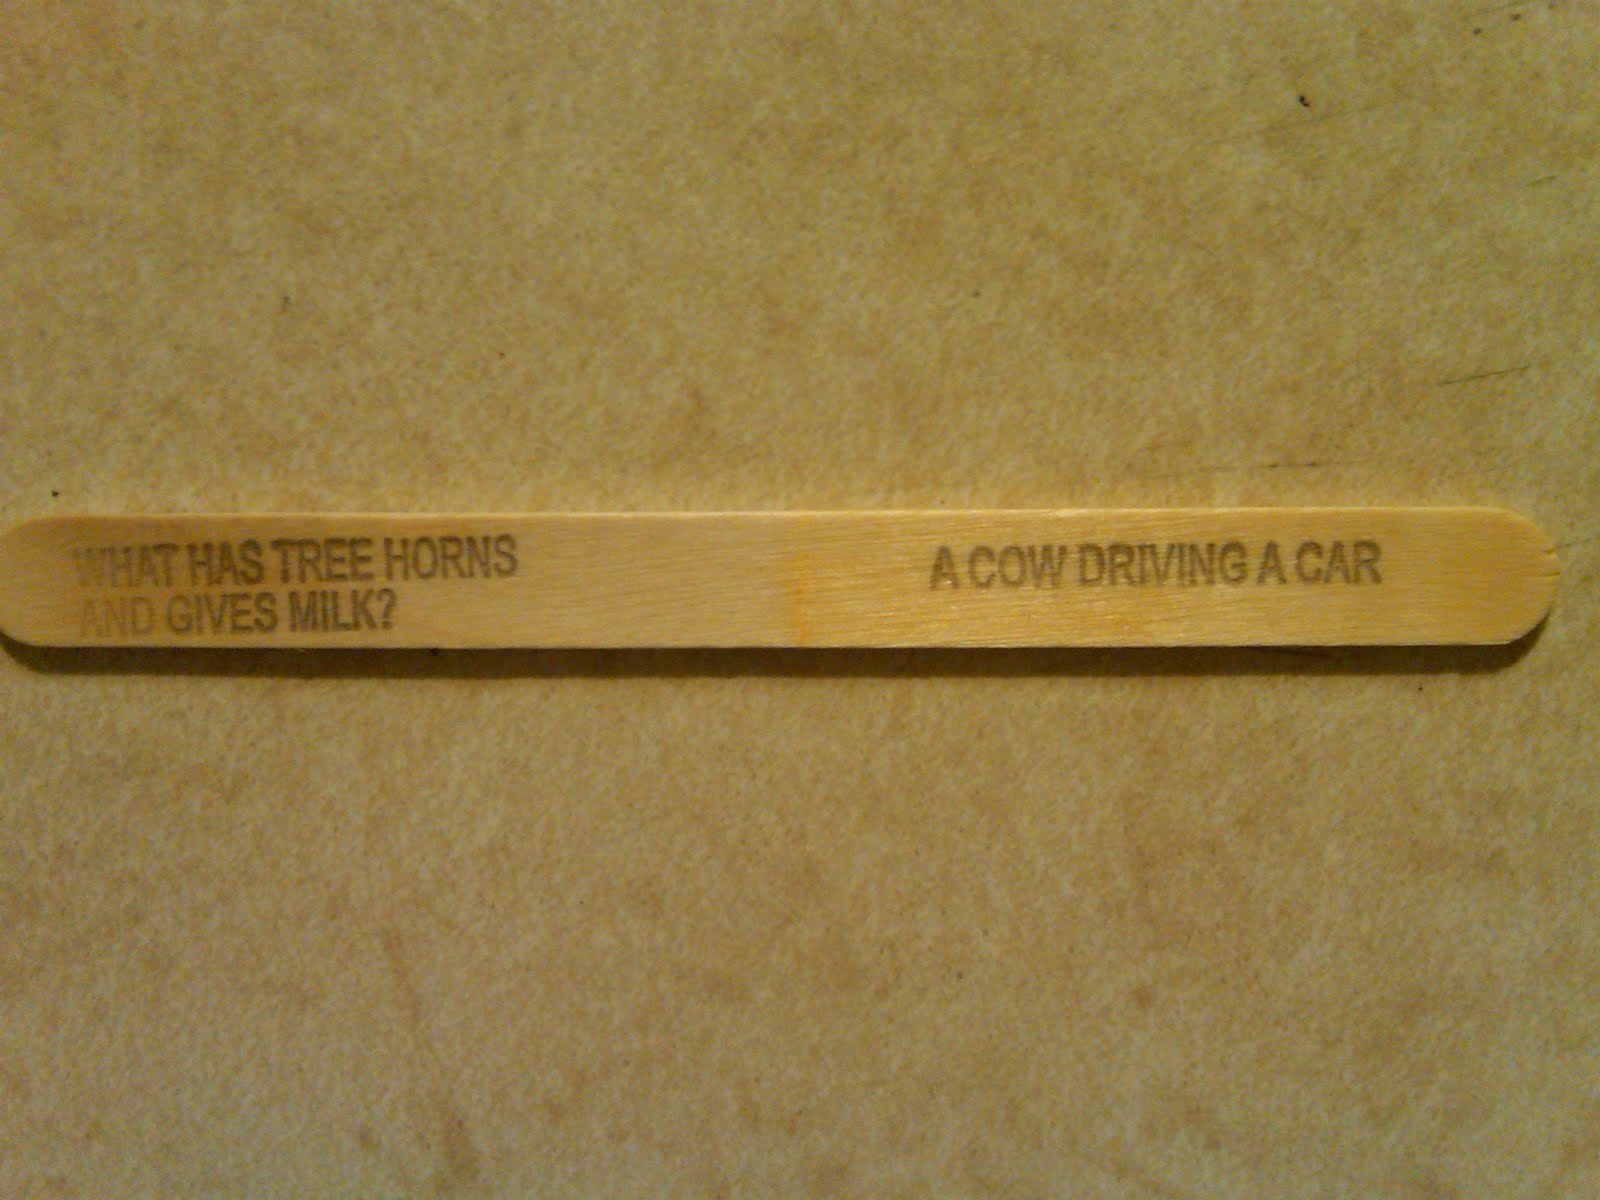 popsicle jokes - What Has Tree Horns And Gives Milk? A Cow Driving A Car